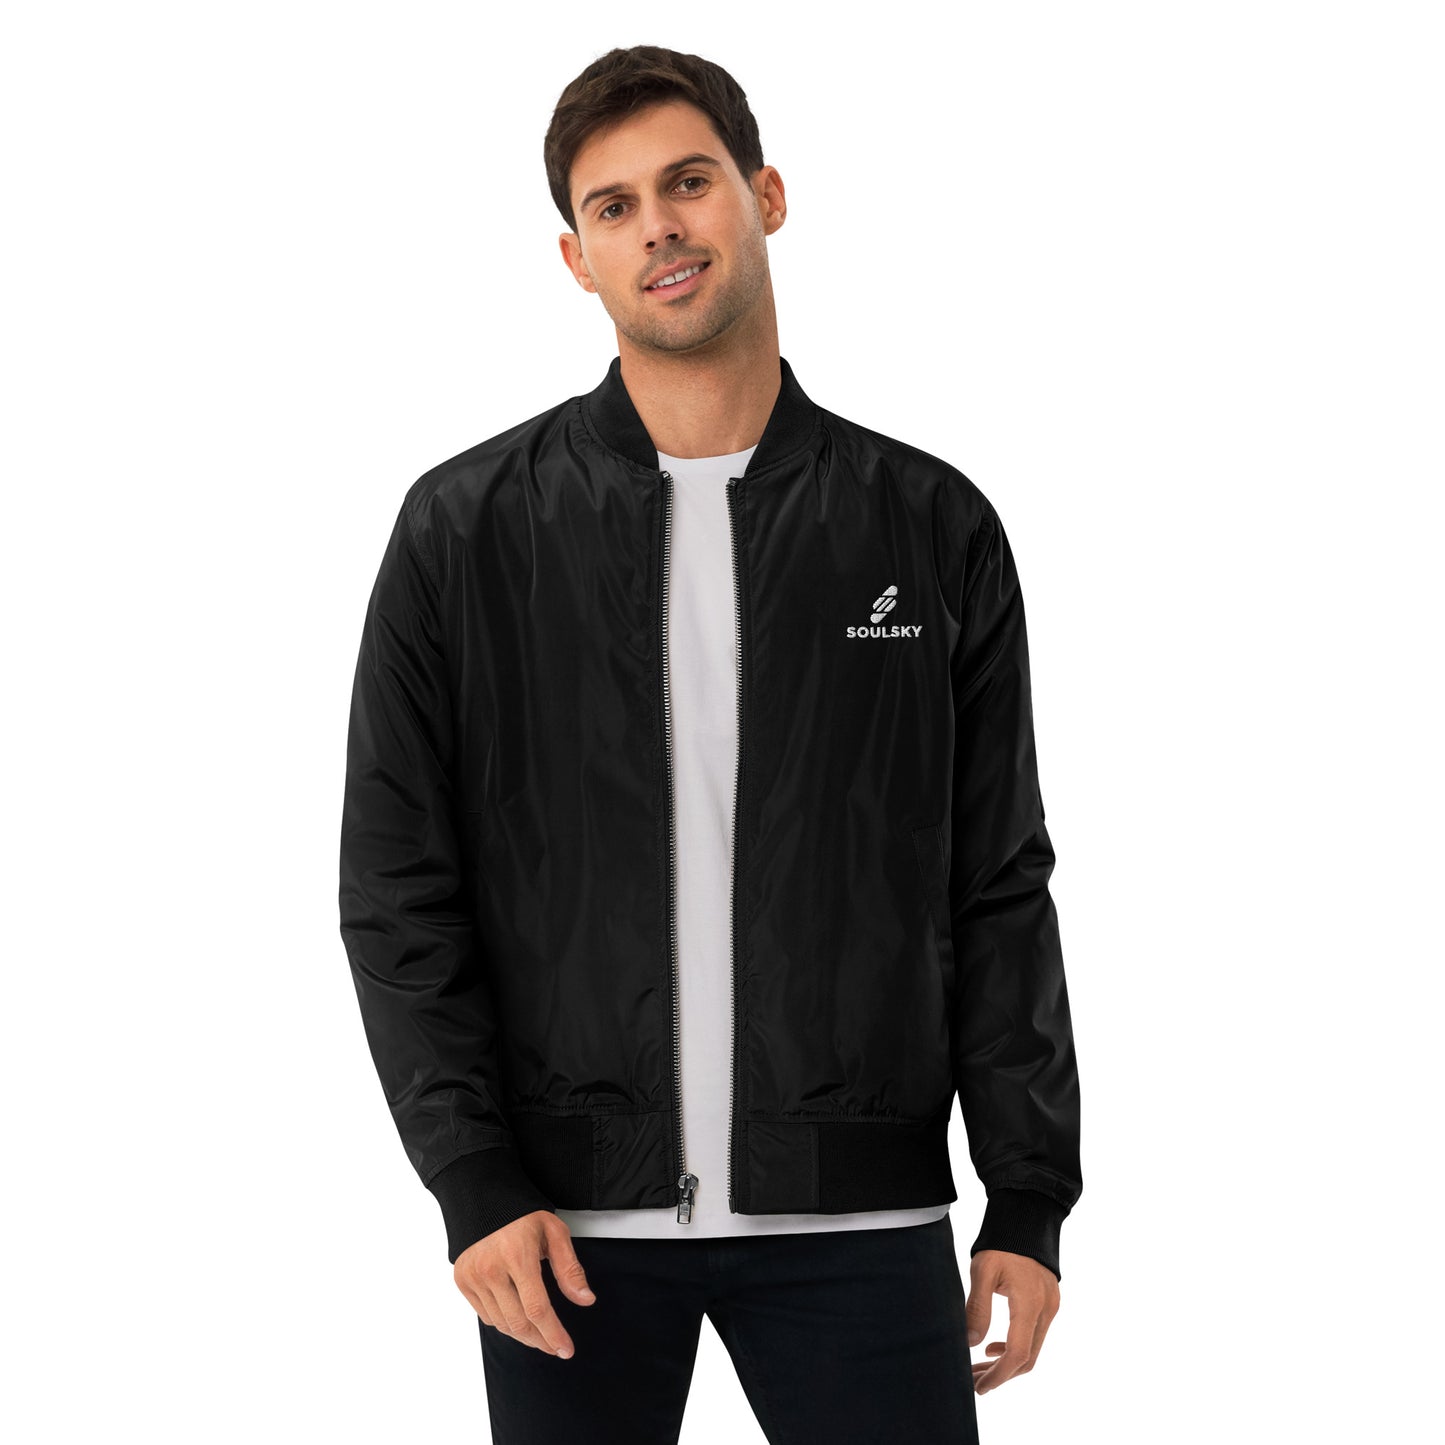 STAY THE COURSE Premium Bomber Jacket